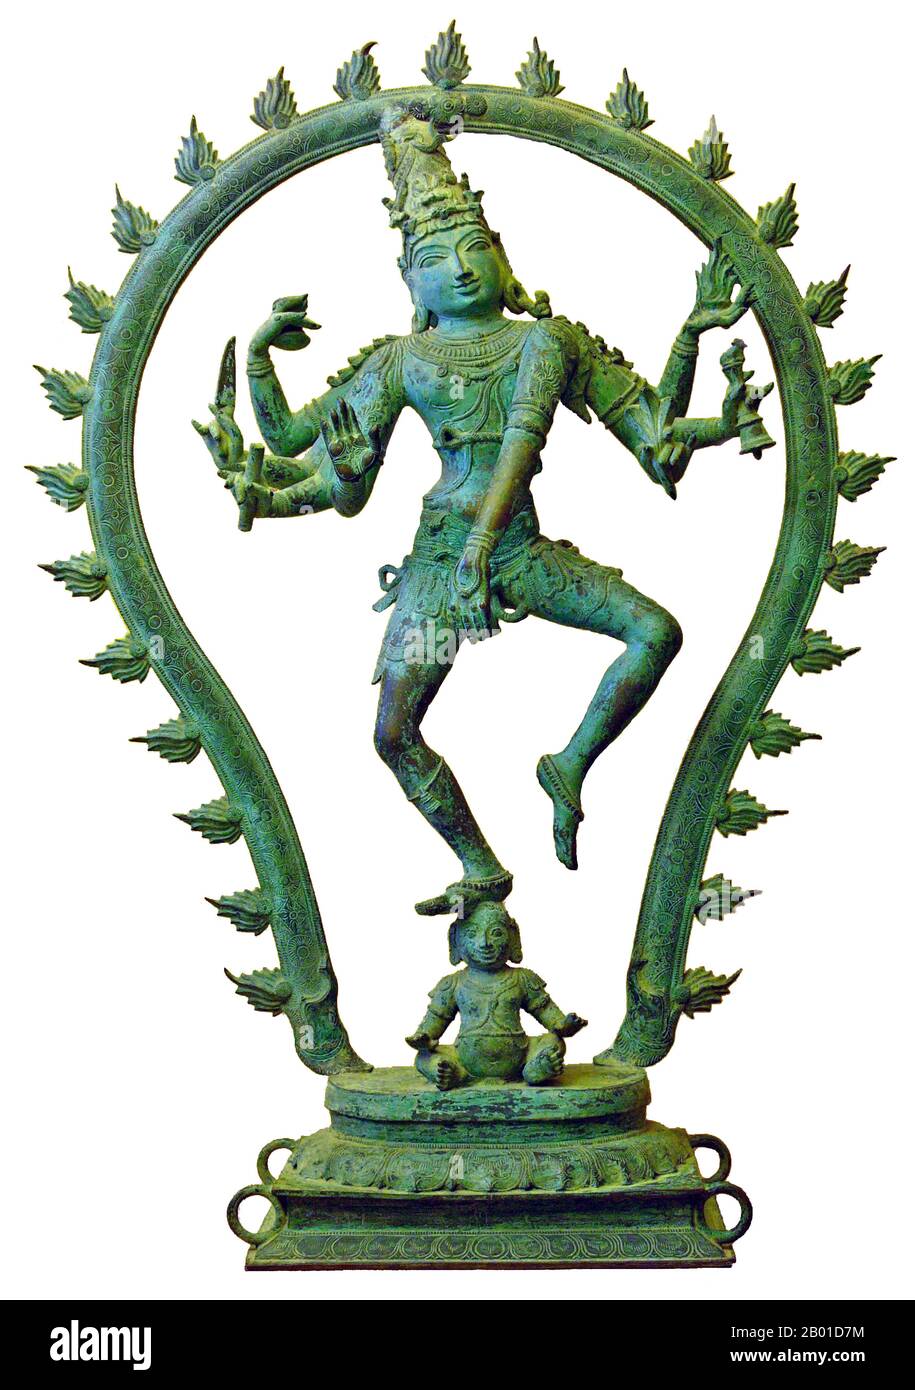 India: Shiva Nataraja or 'Dancing Shiva' from Pondicherry, c. 15th century CE. Bronze covered with green patina from weathering in salty air, placed for some hundred years in a temple close to the sea. Photo by Hannes Grobe (CC BY-SA 3.0 License).  Nataraja or Nataraj ('The Lord (or King) of Dance'; Tamil: Kooththan) is a Tamil depiction of the Hindu god Shiva as the cosmic dancer Koothan who performs his divine dance to destroy a weary universe and make preparations for the god Brahma to start the process of creation. Stock Photo